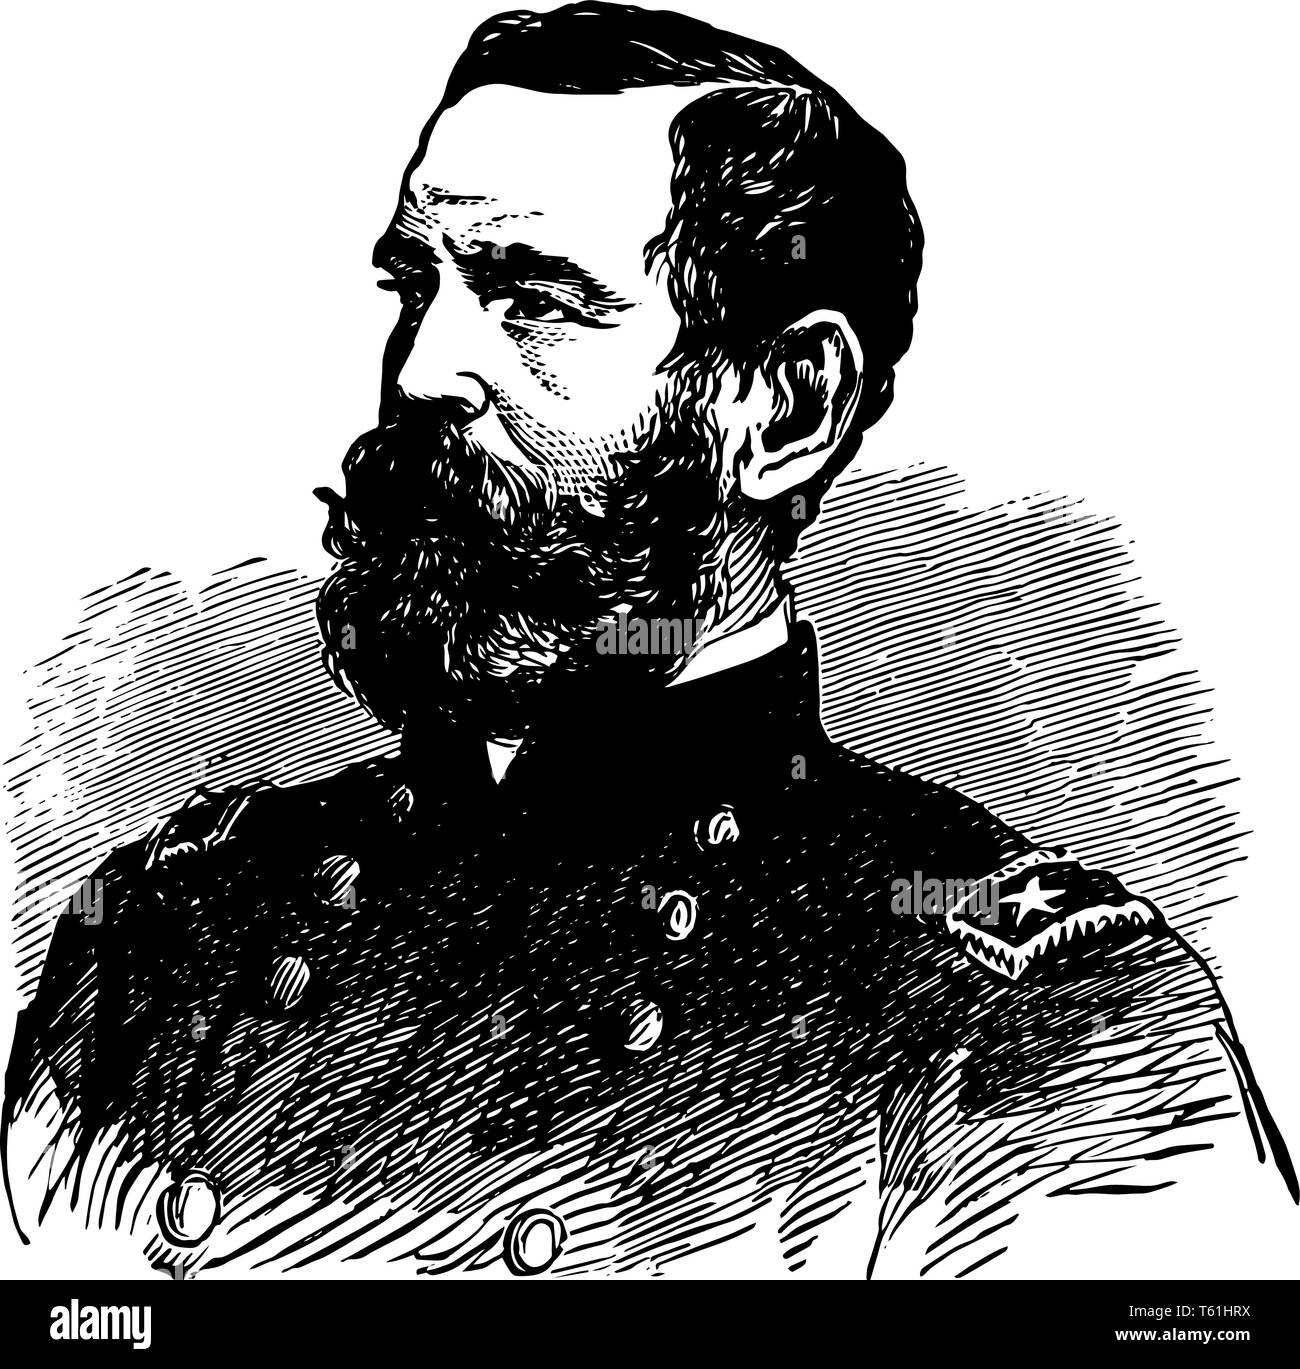 Fitz John Porter 1822 to 1901 he was a career United States army officer and a union general during the American civil war vintage line drawing or eng Stock Vector